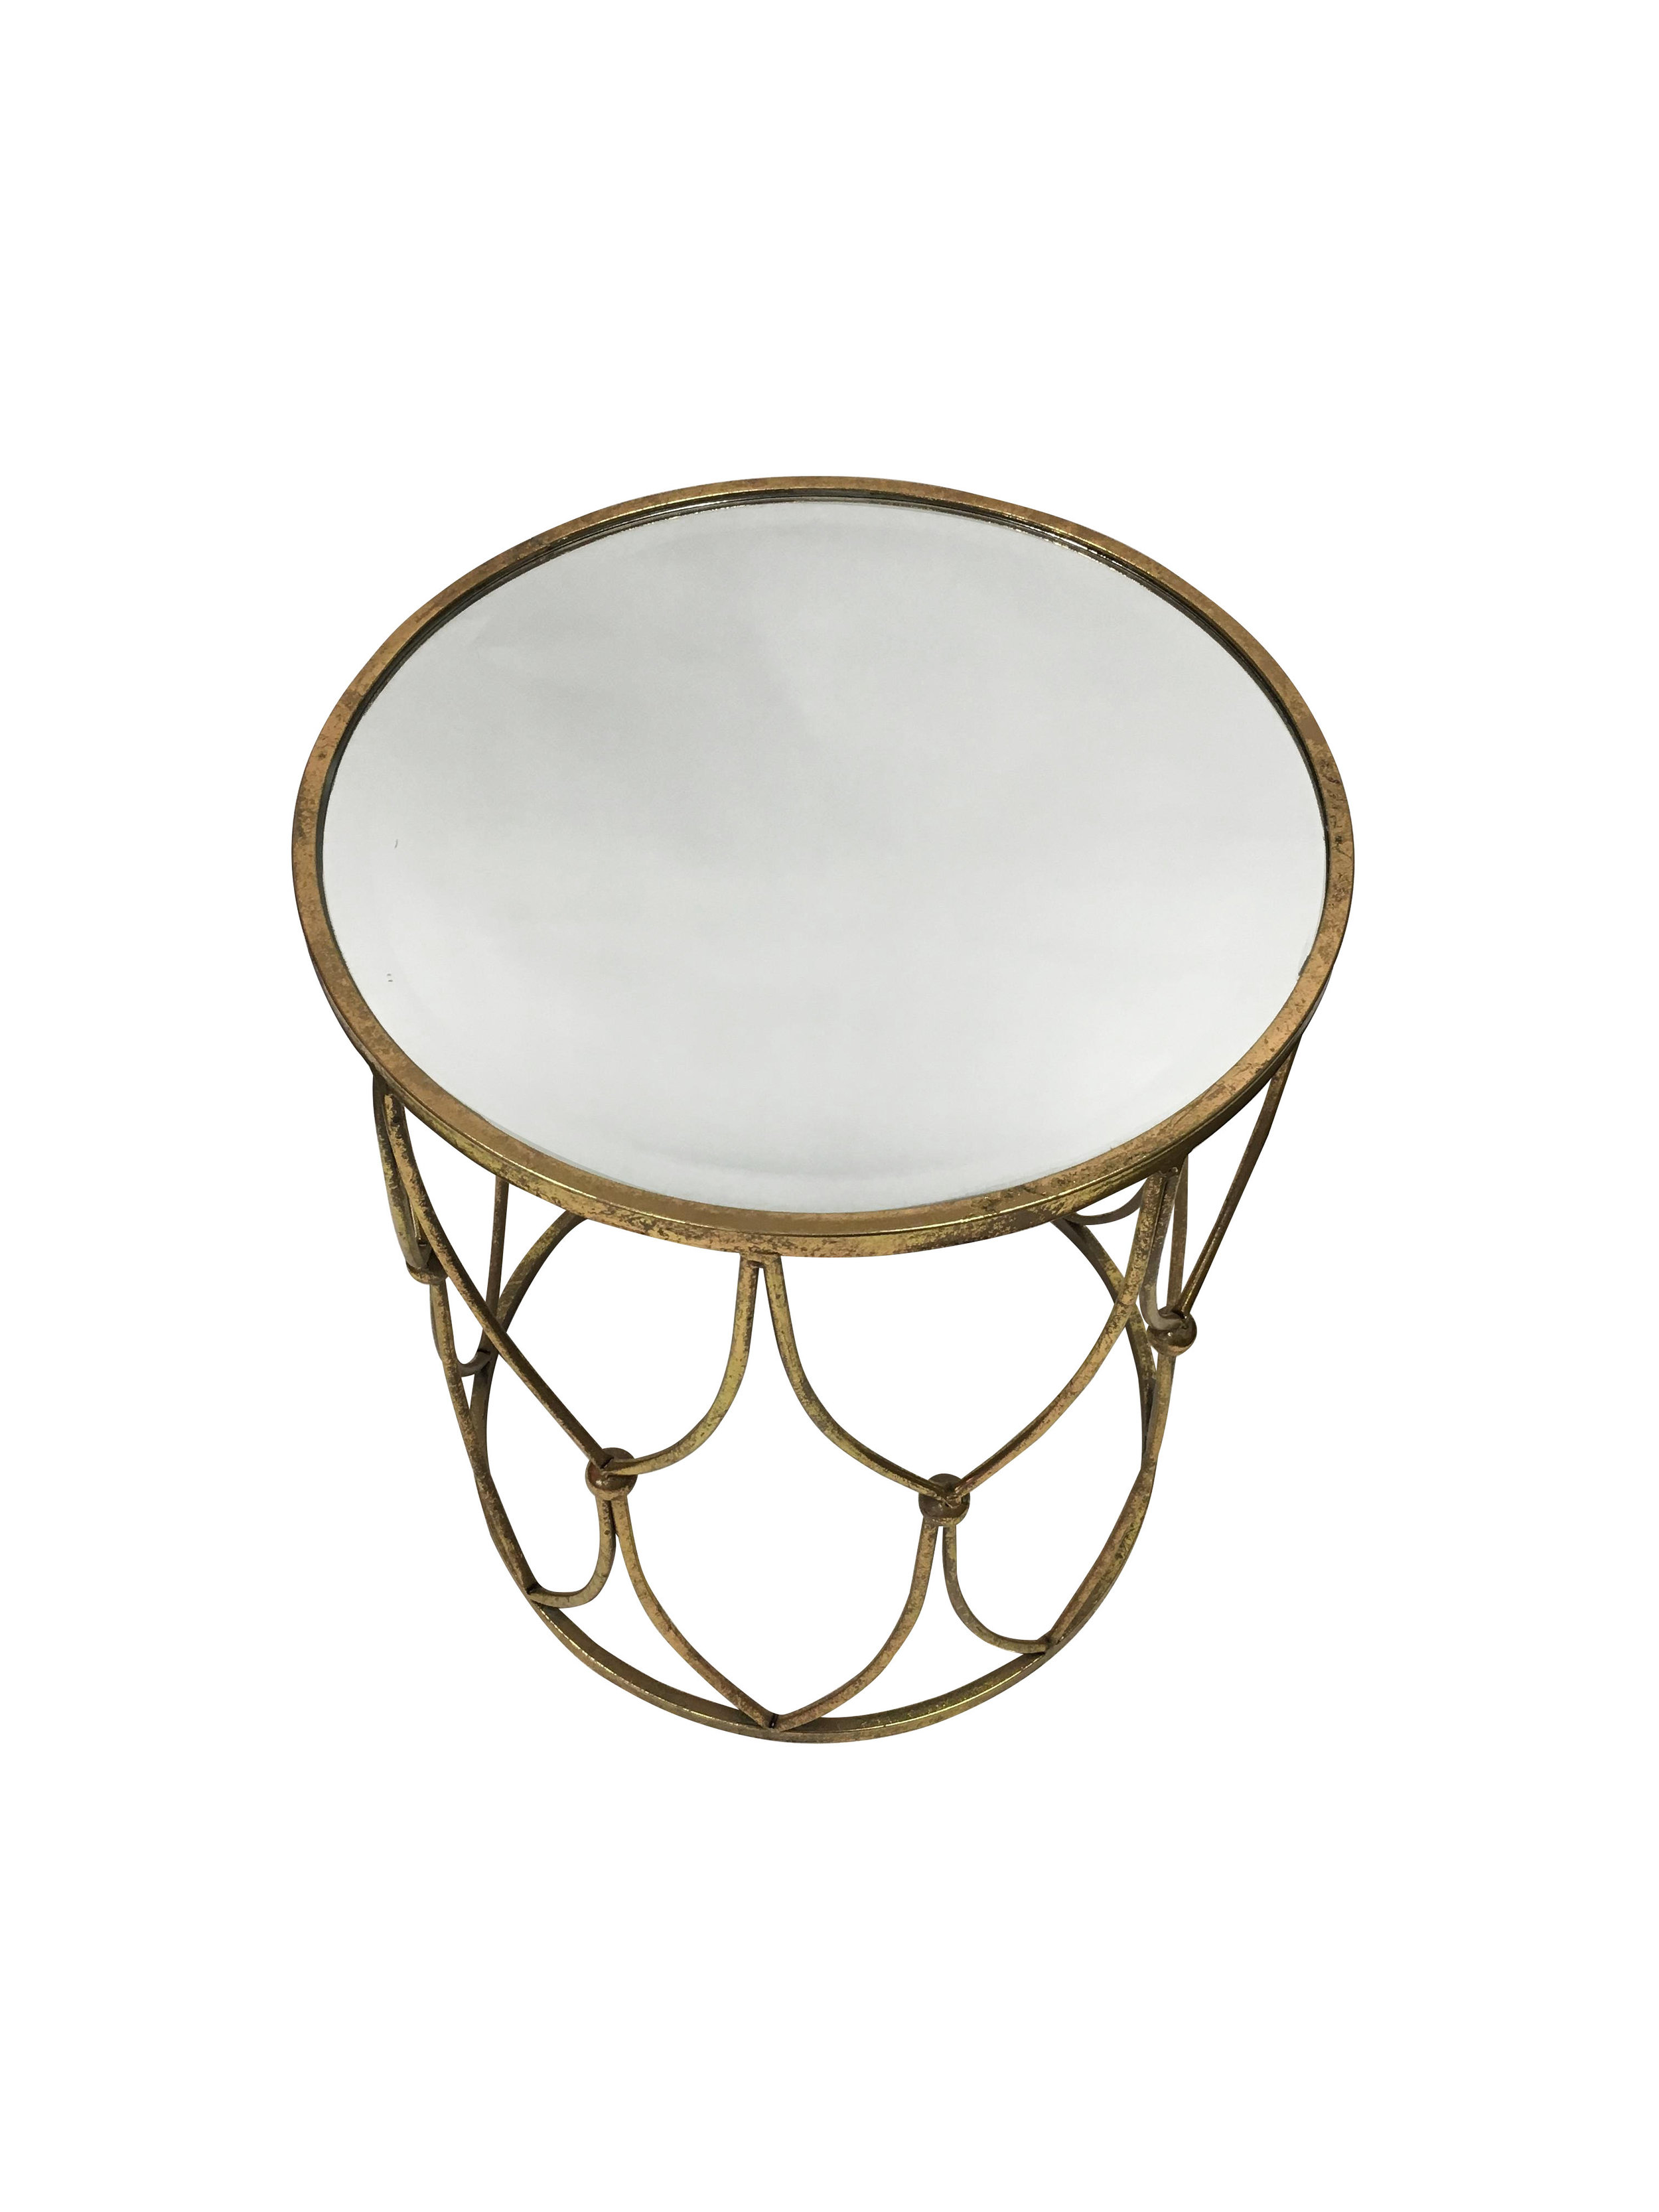 Gold Round Side Table with Mirrored Top4.jpg